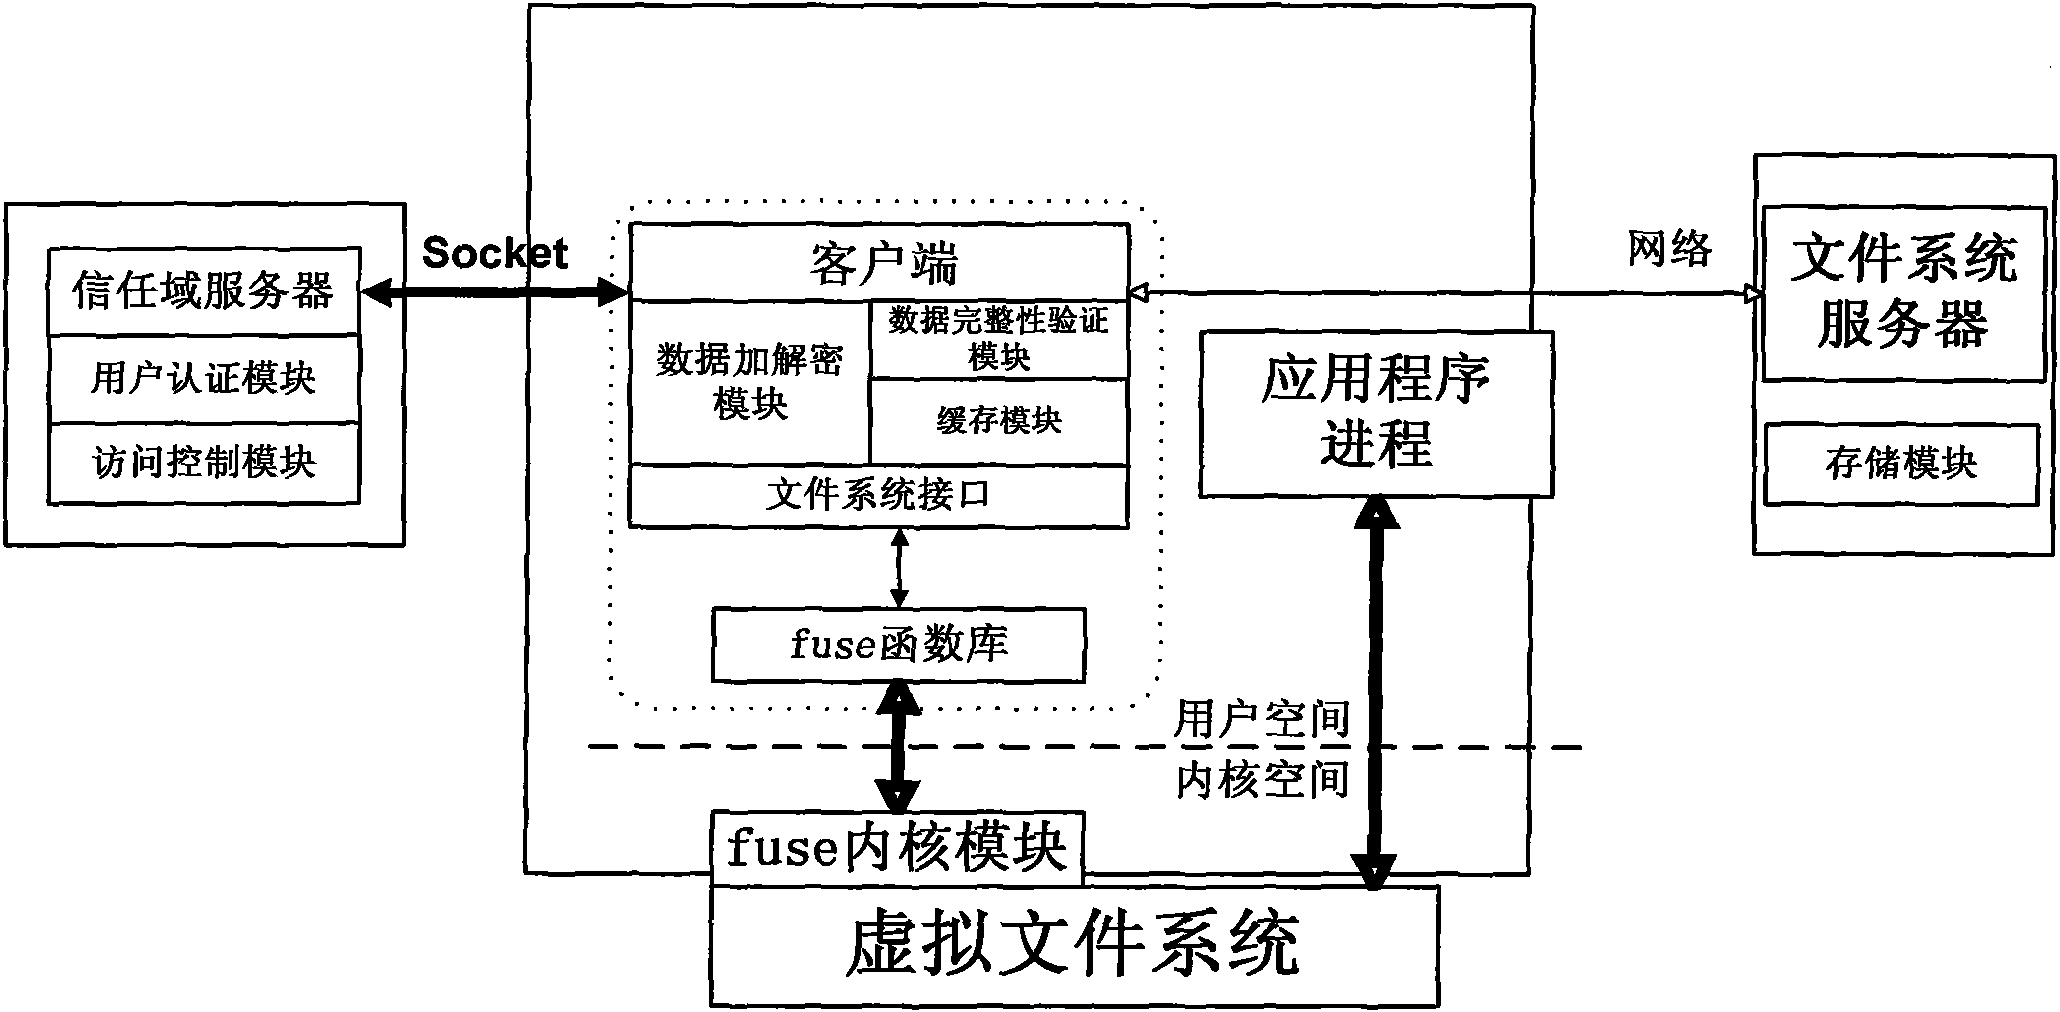 Method for implementing safe storage system in cloud storage environment